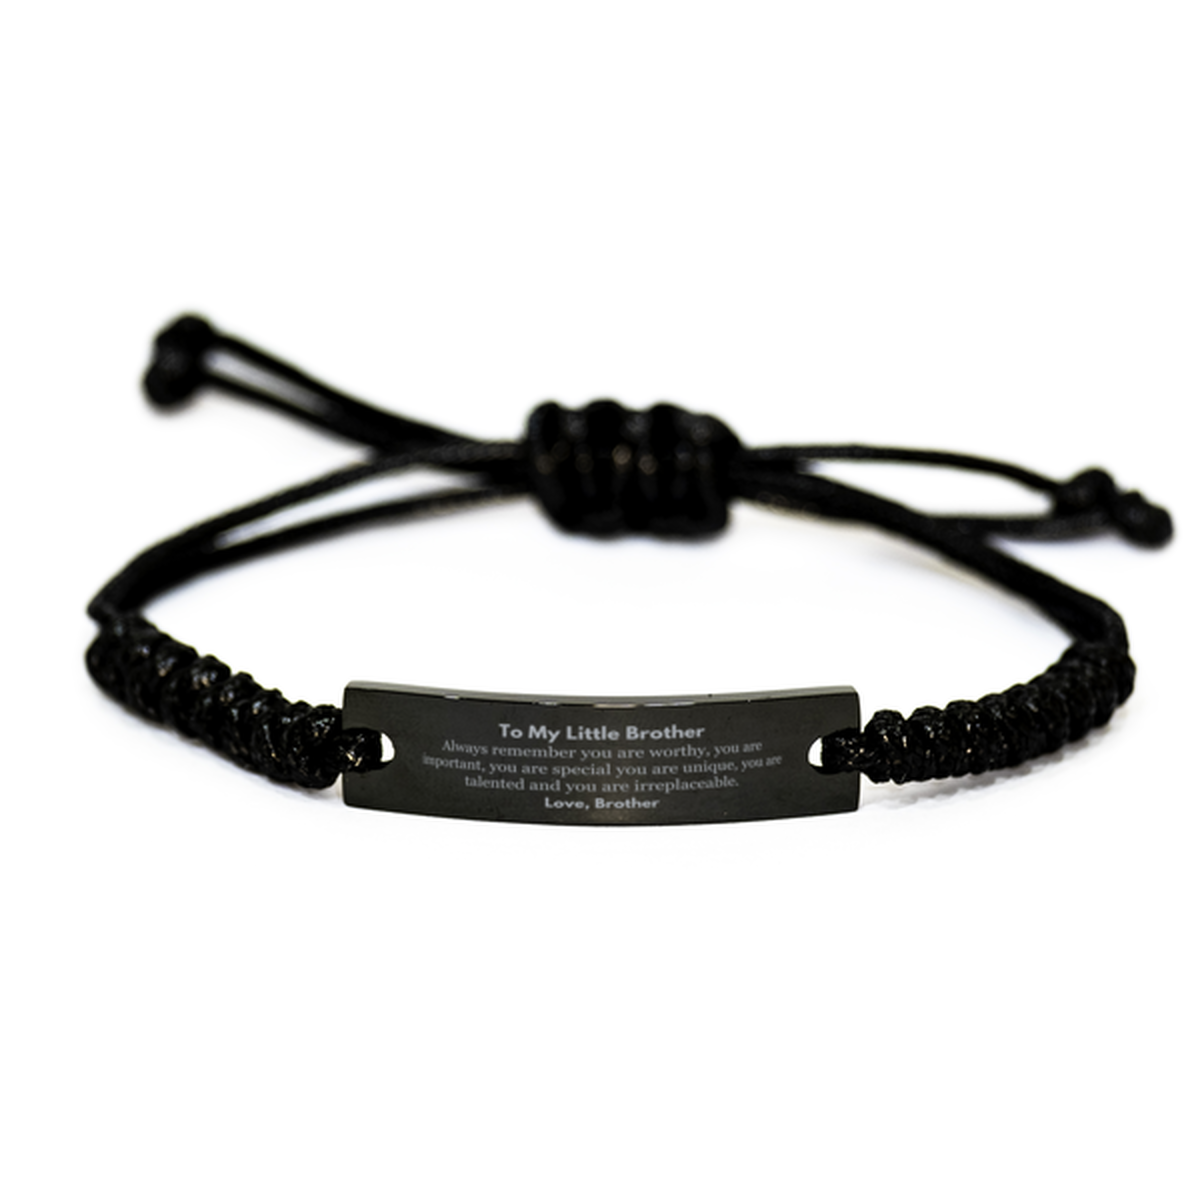 Little Brother Birthday Gifts from Brother, Inspirational Black Rope Bracelet for Little Brother Christmas Graduation Gifts for Little Brother Always remember you are worthy, you are important. Love, Brother